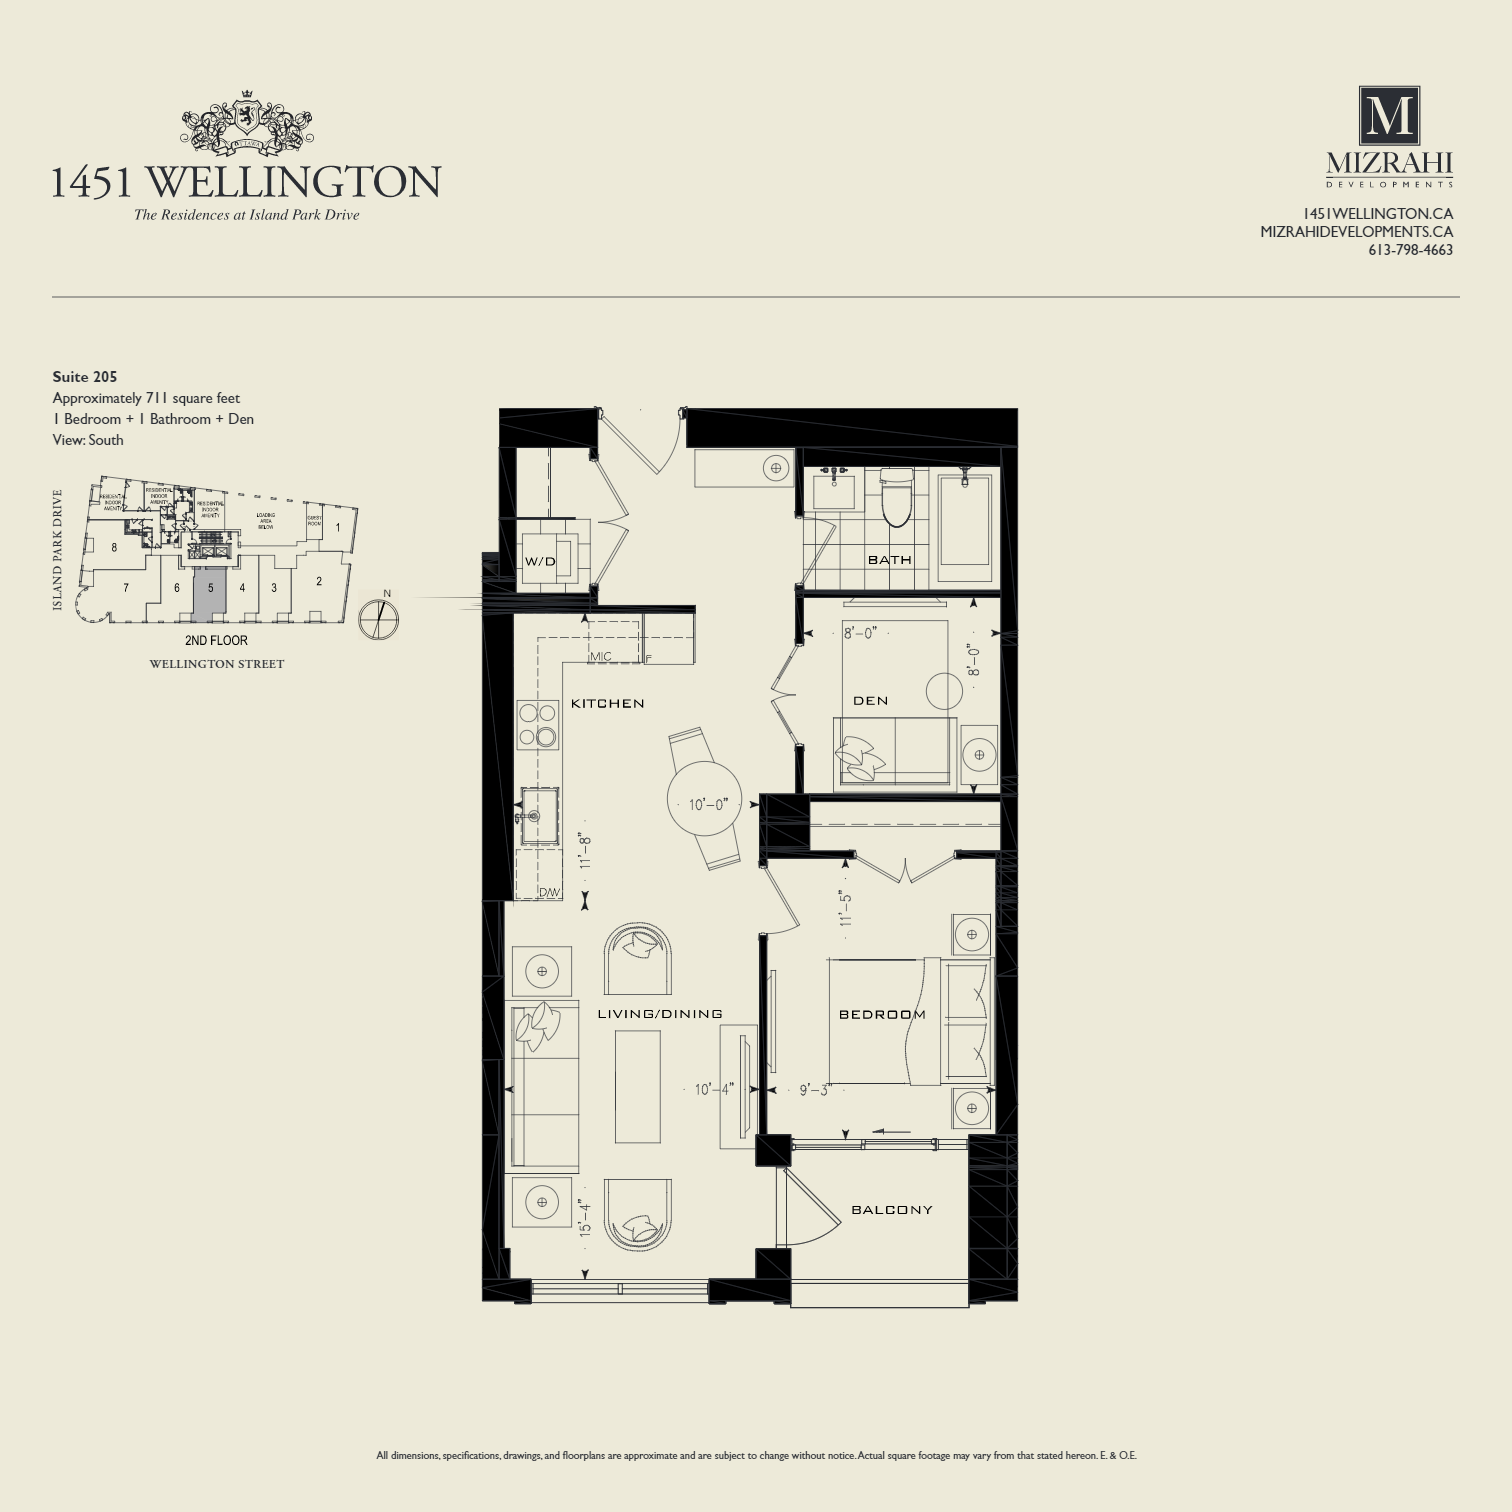 711 sq ft Floor Plan of The Residences at Island Park Drive Condos with undefined beds